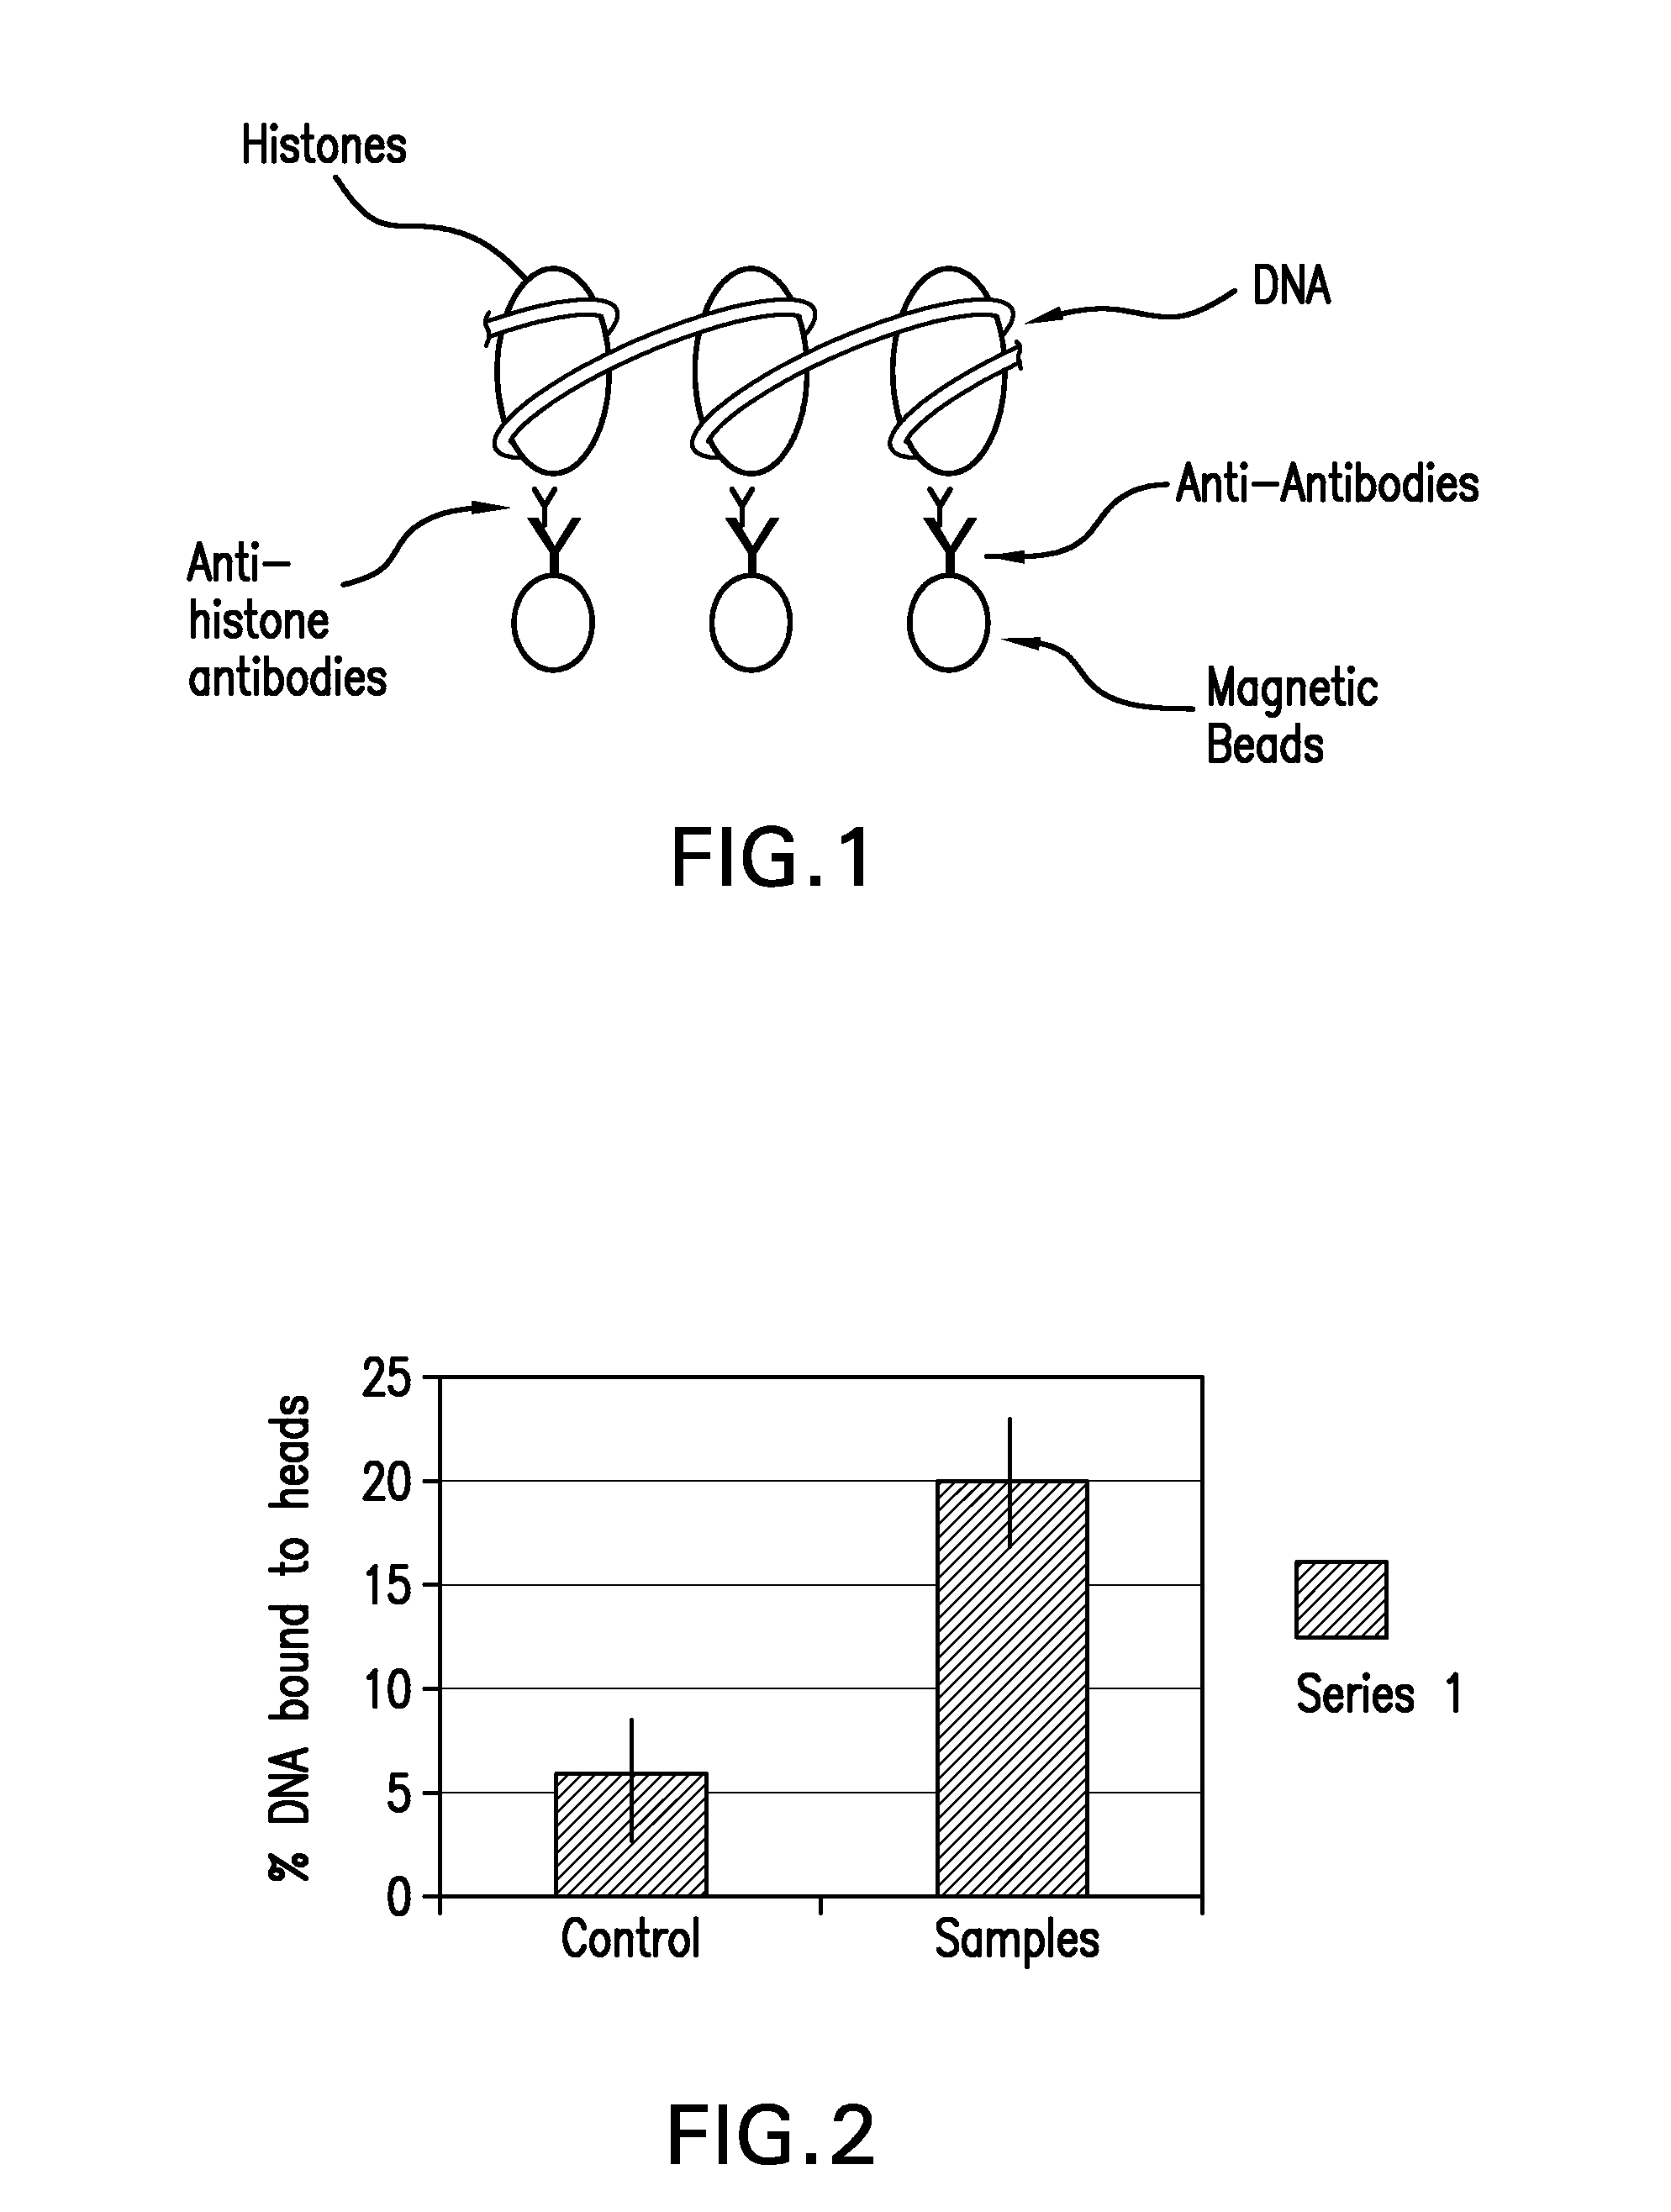 Method of Separating Target DNA from Mixed DNA